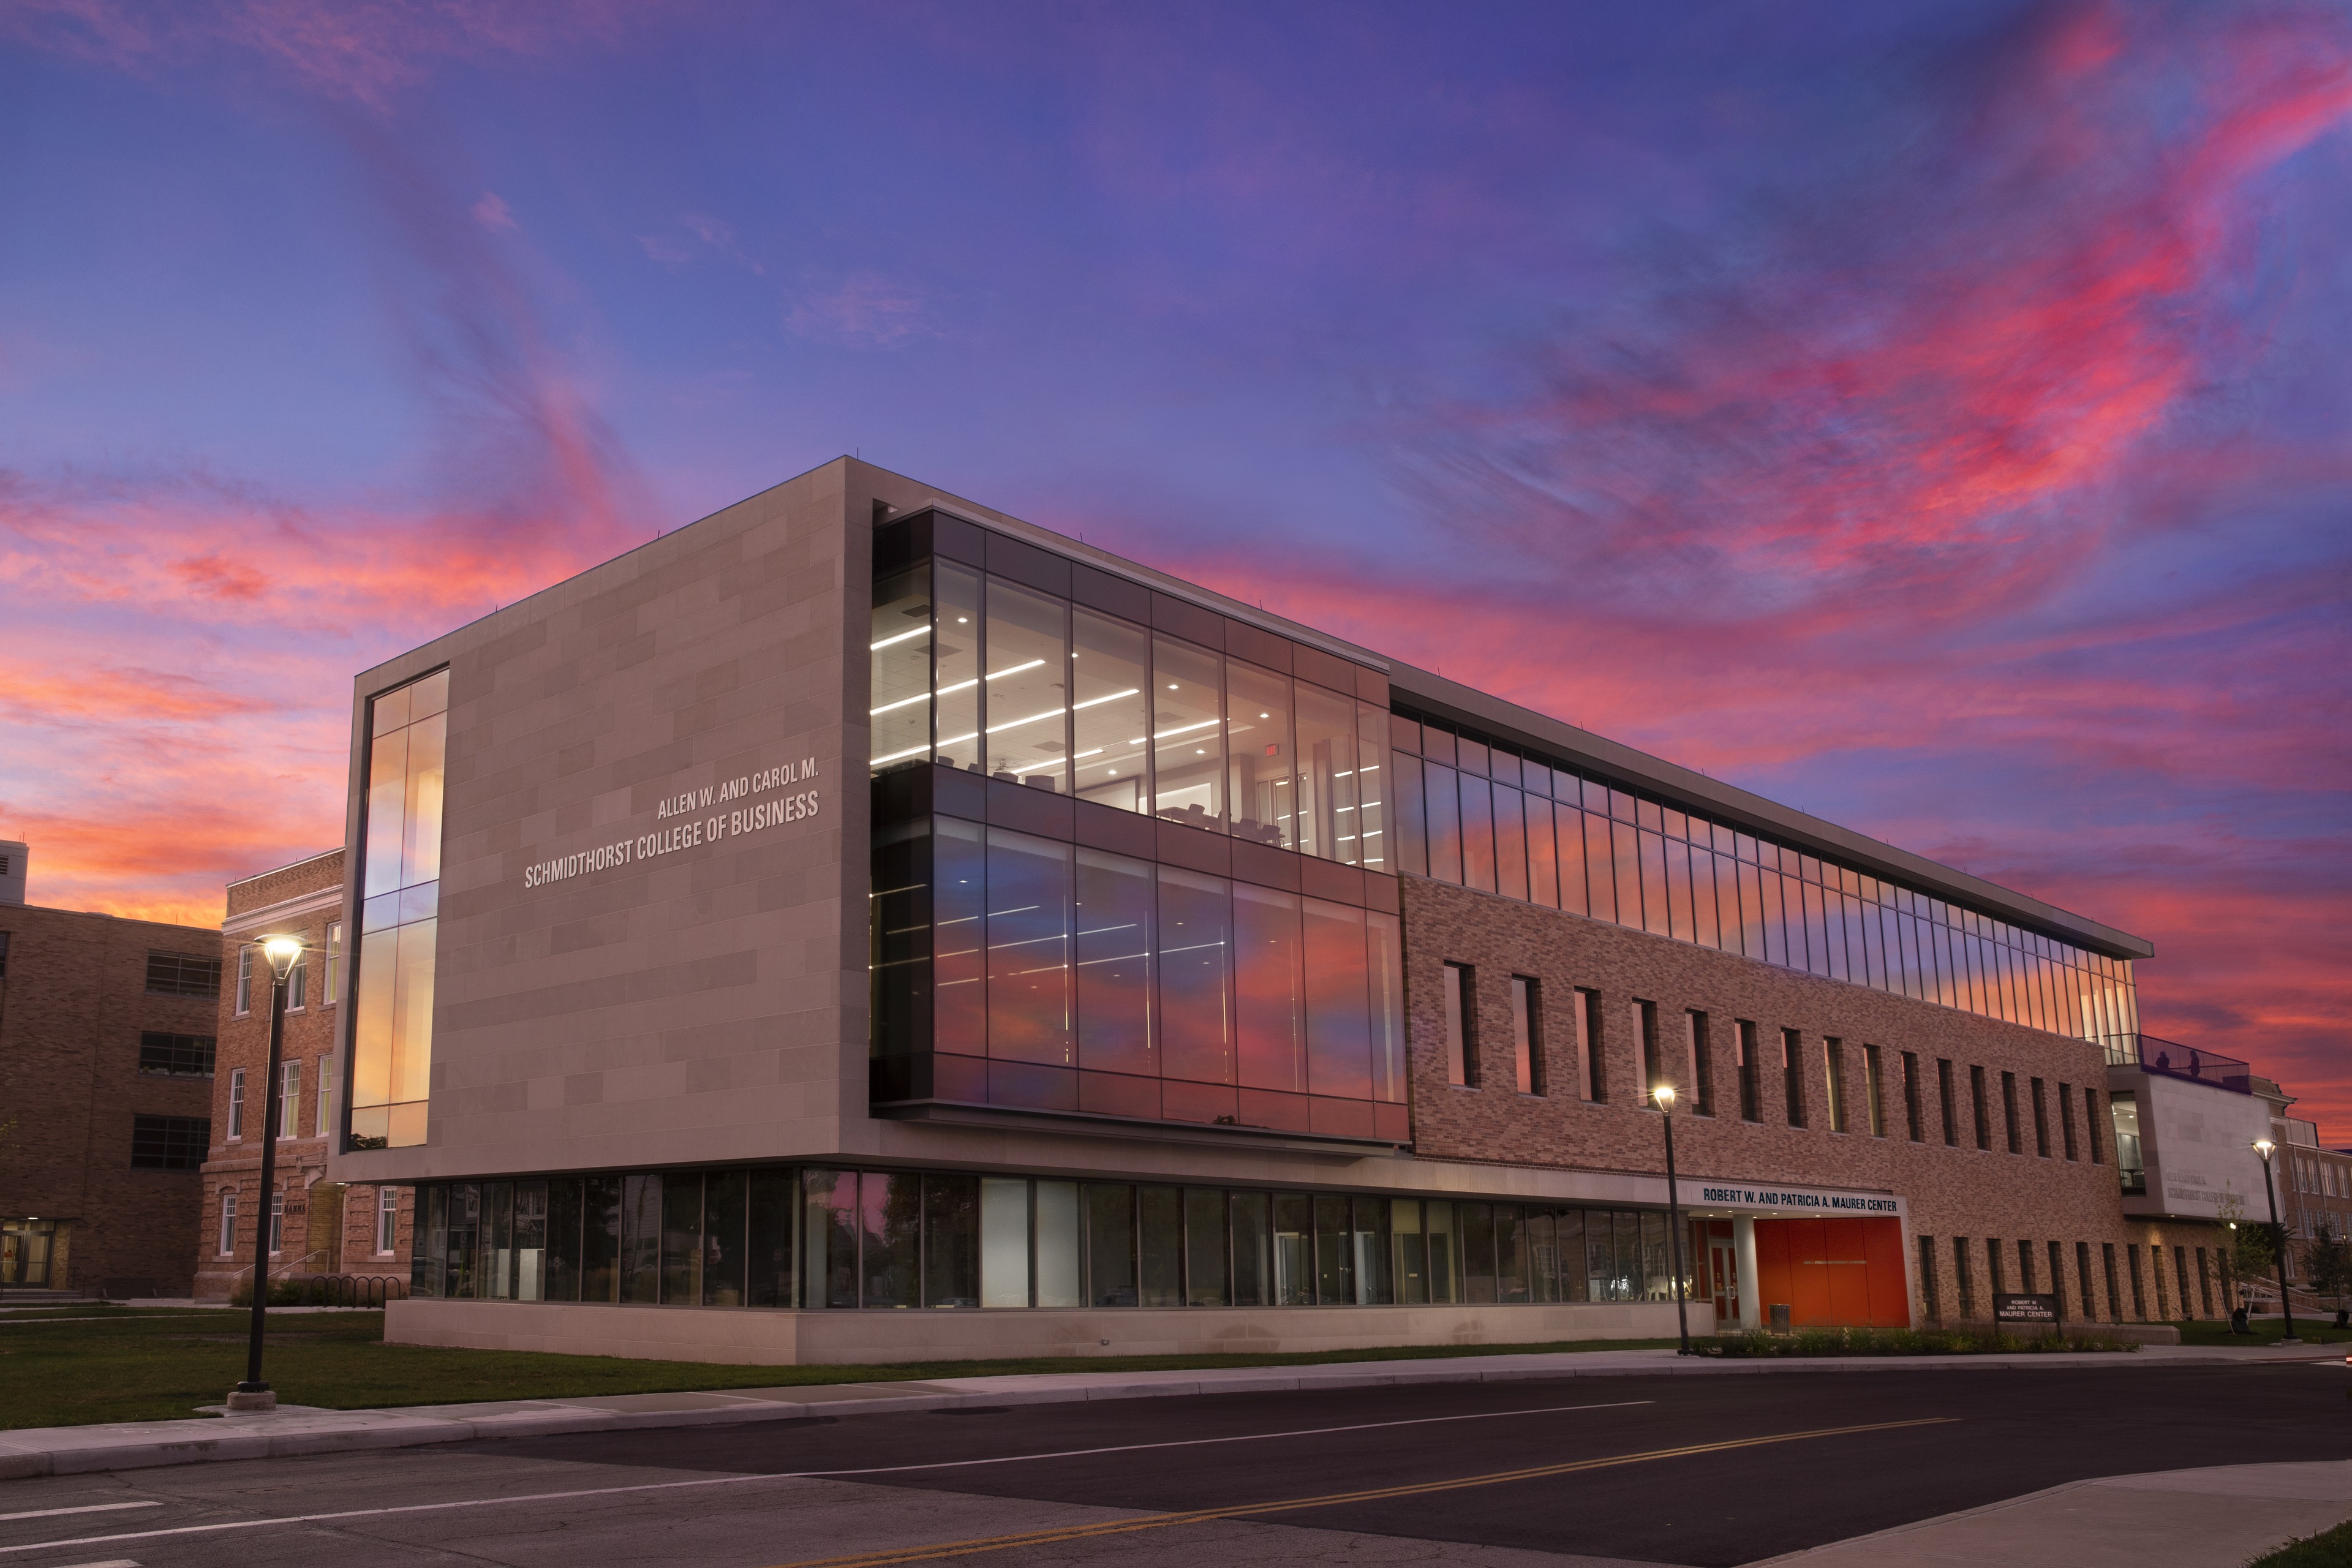 Ohio Business Week will be held at BGSU in the state-of-the-art Maurer Center, home to the Schmidthorst College of Business.